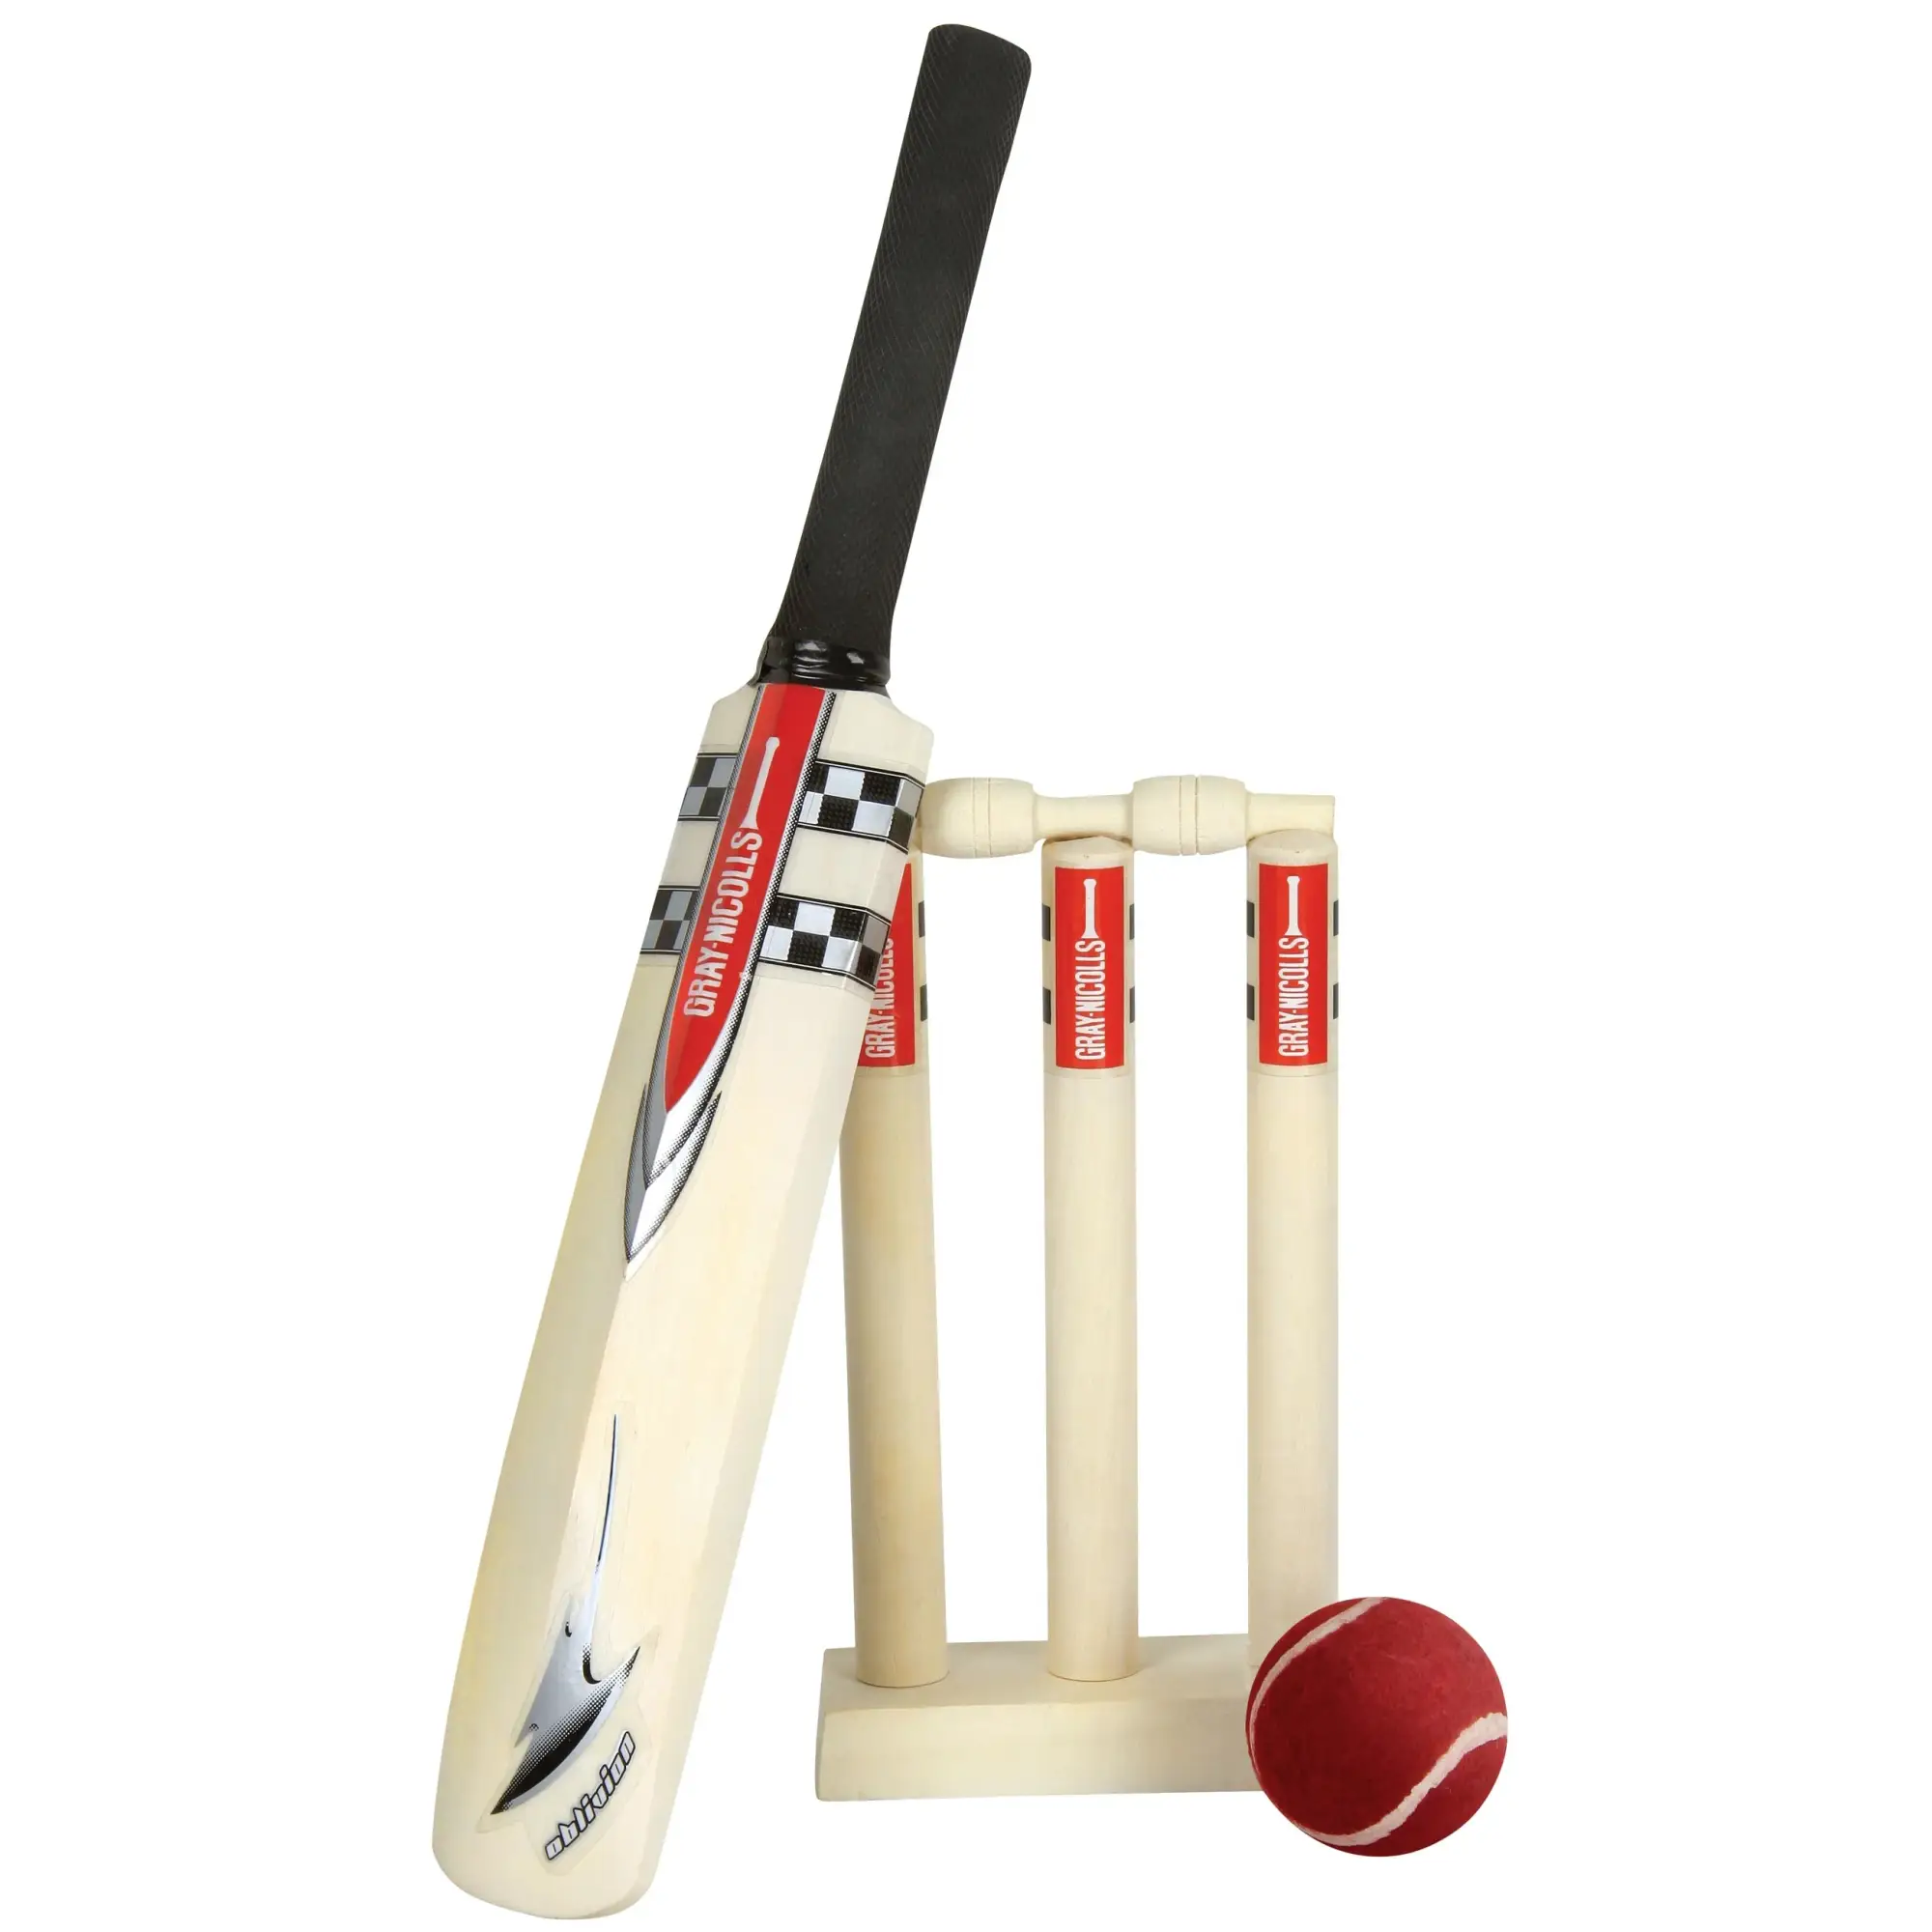 Cricket Kits For Juniors And Adults: Robust And High Quality Cricket Gear  For Professionals